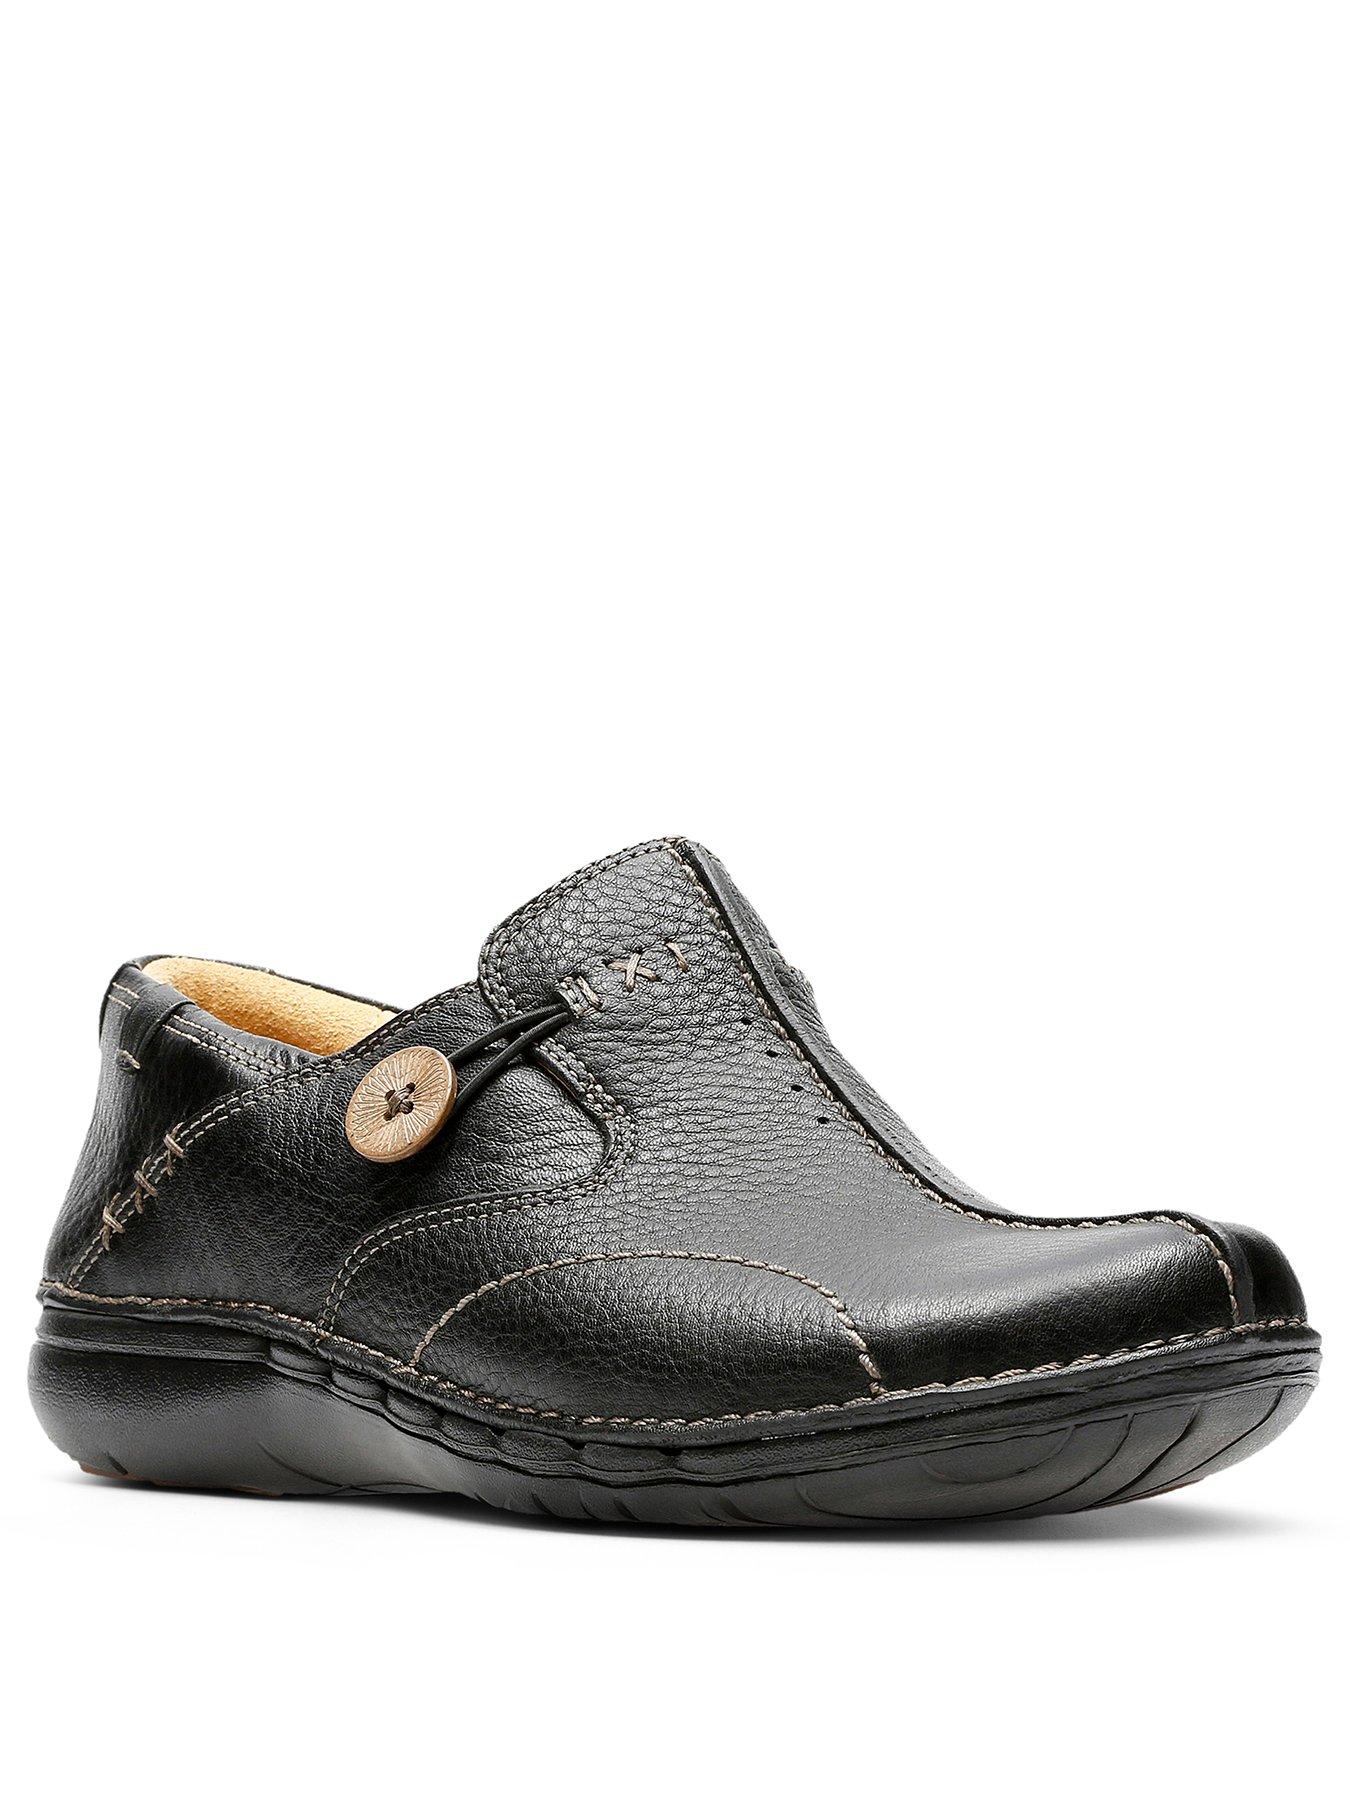 clarks shoes dundrum